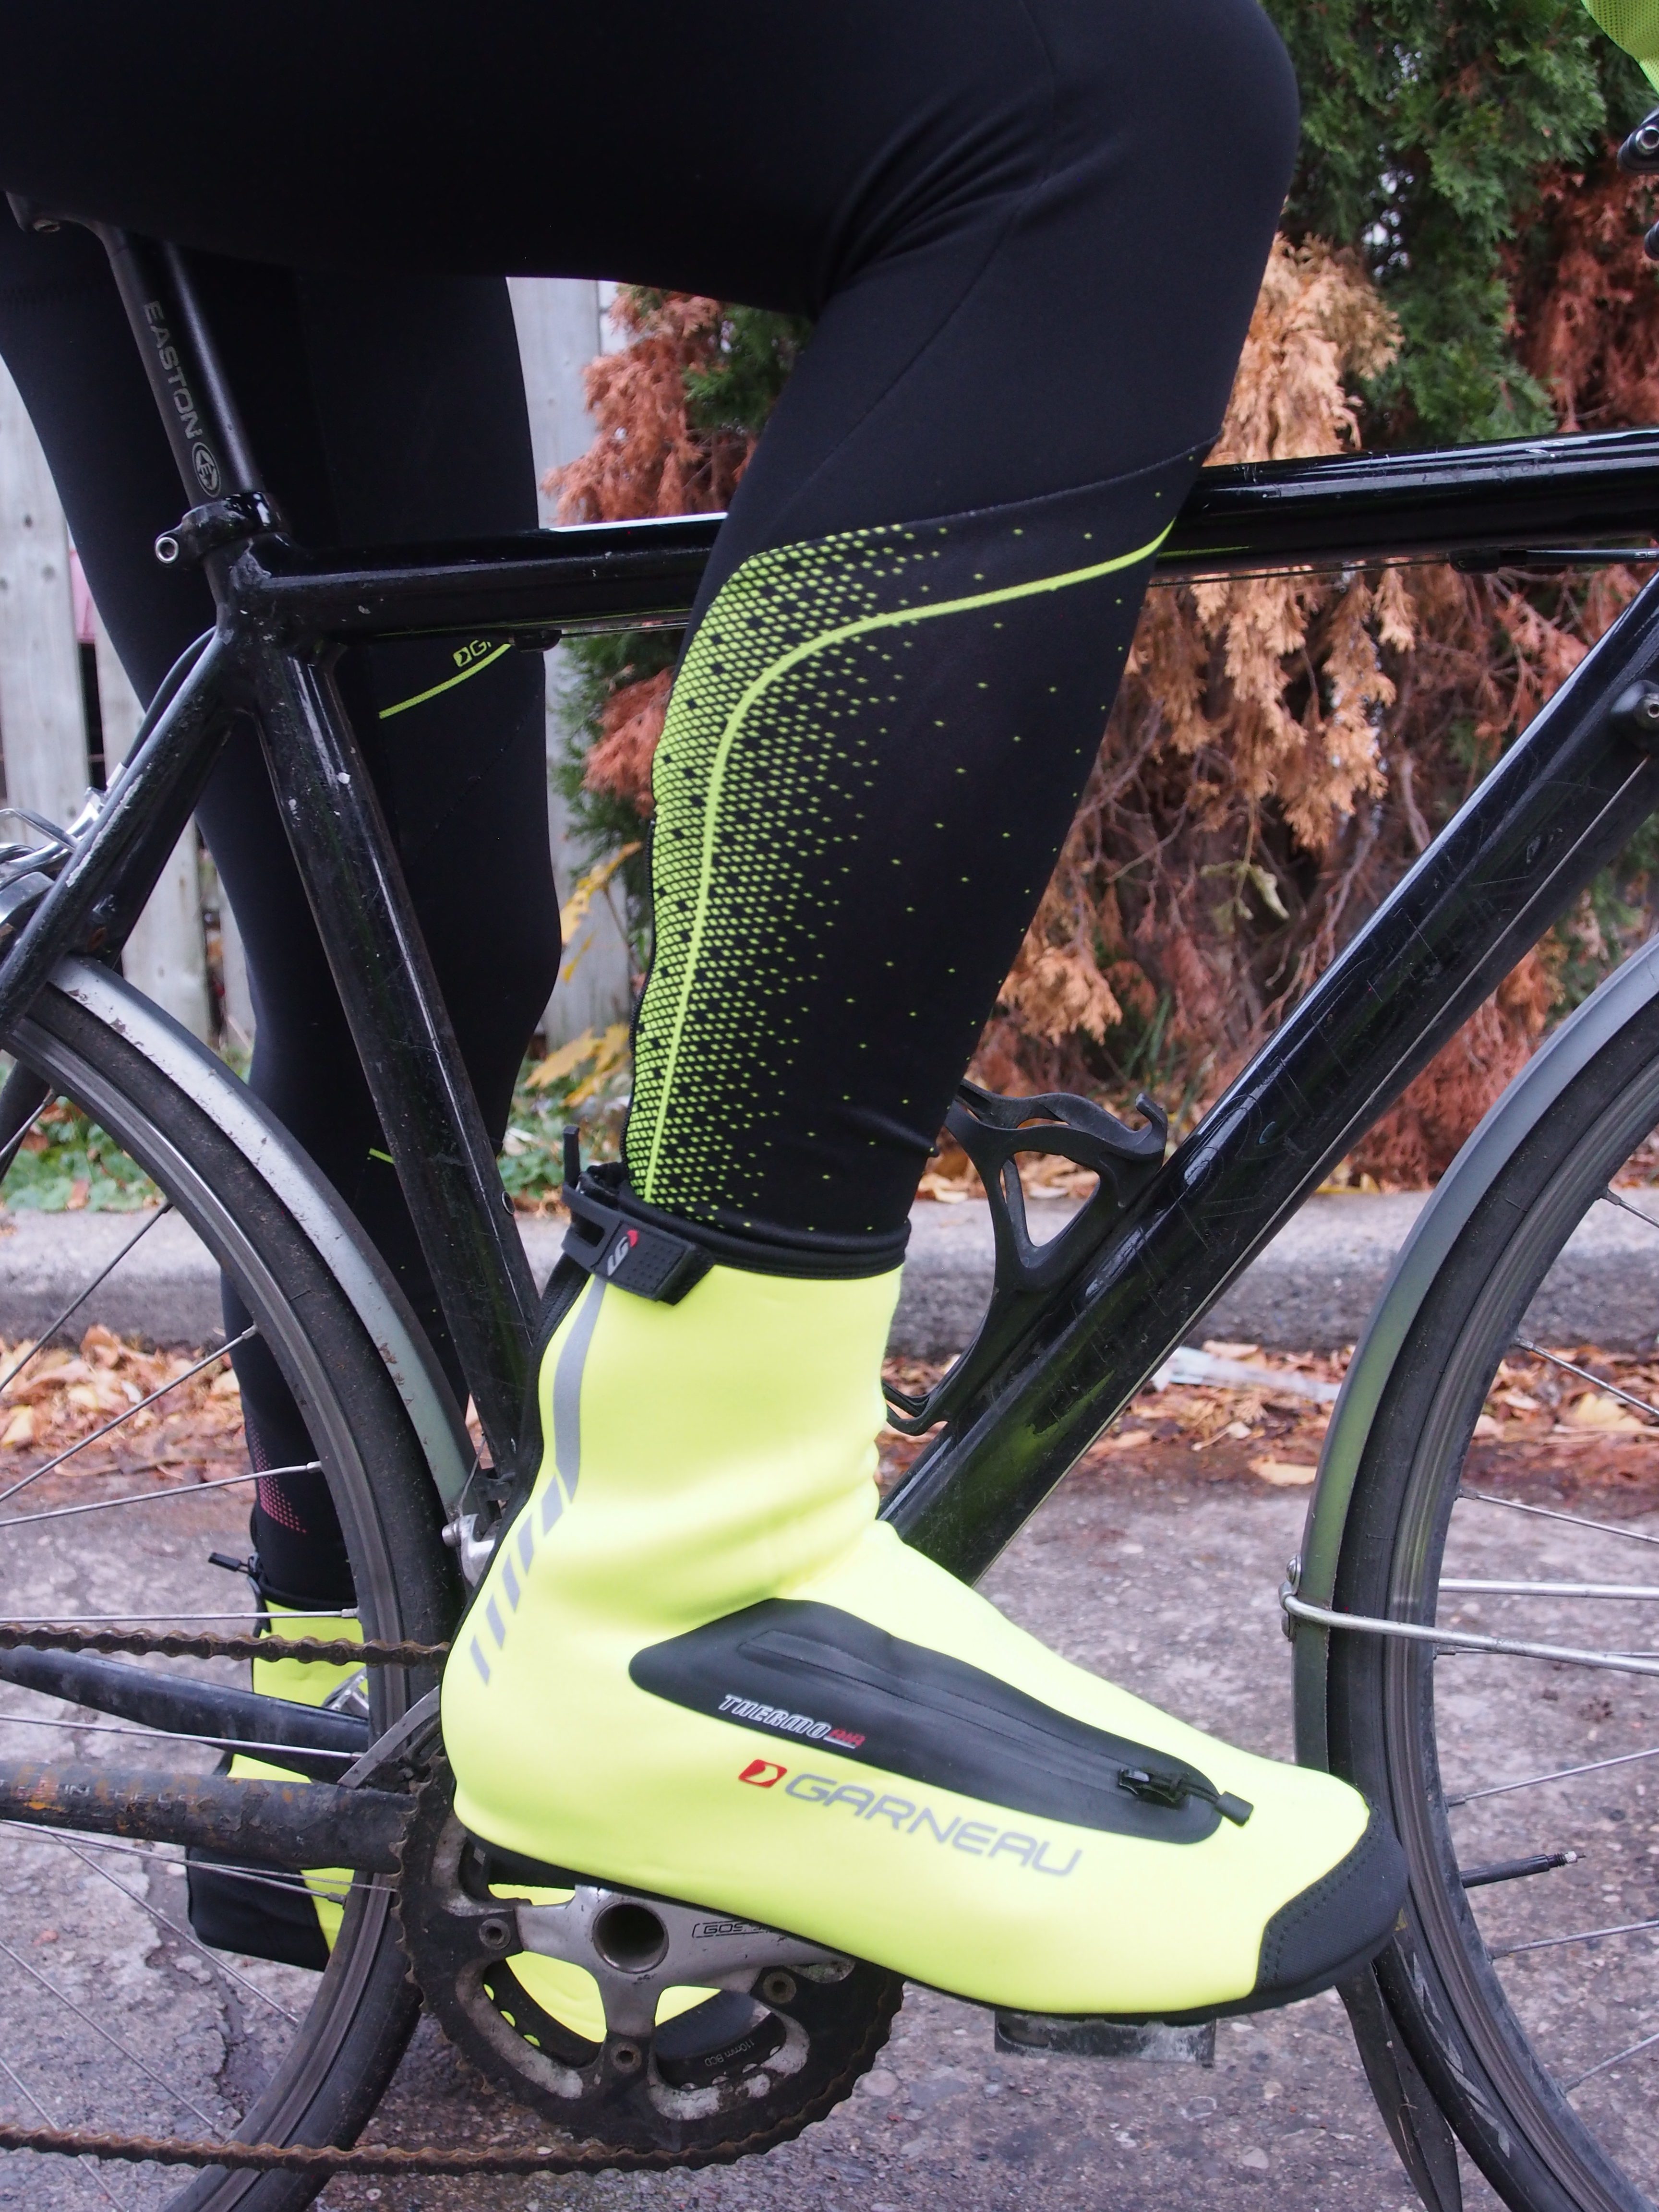 Louis Garneau cold weather riding offerings reviewed - Canadian Cycling  Magazine